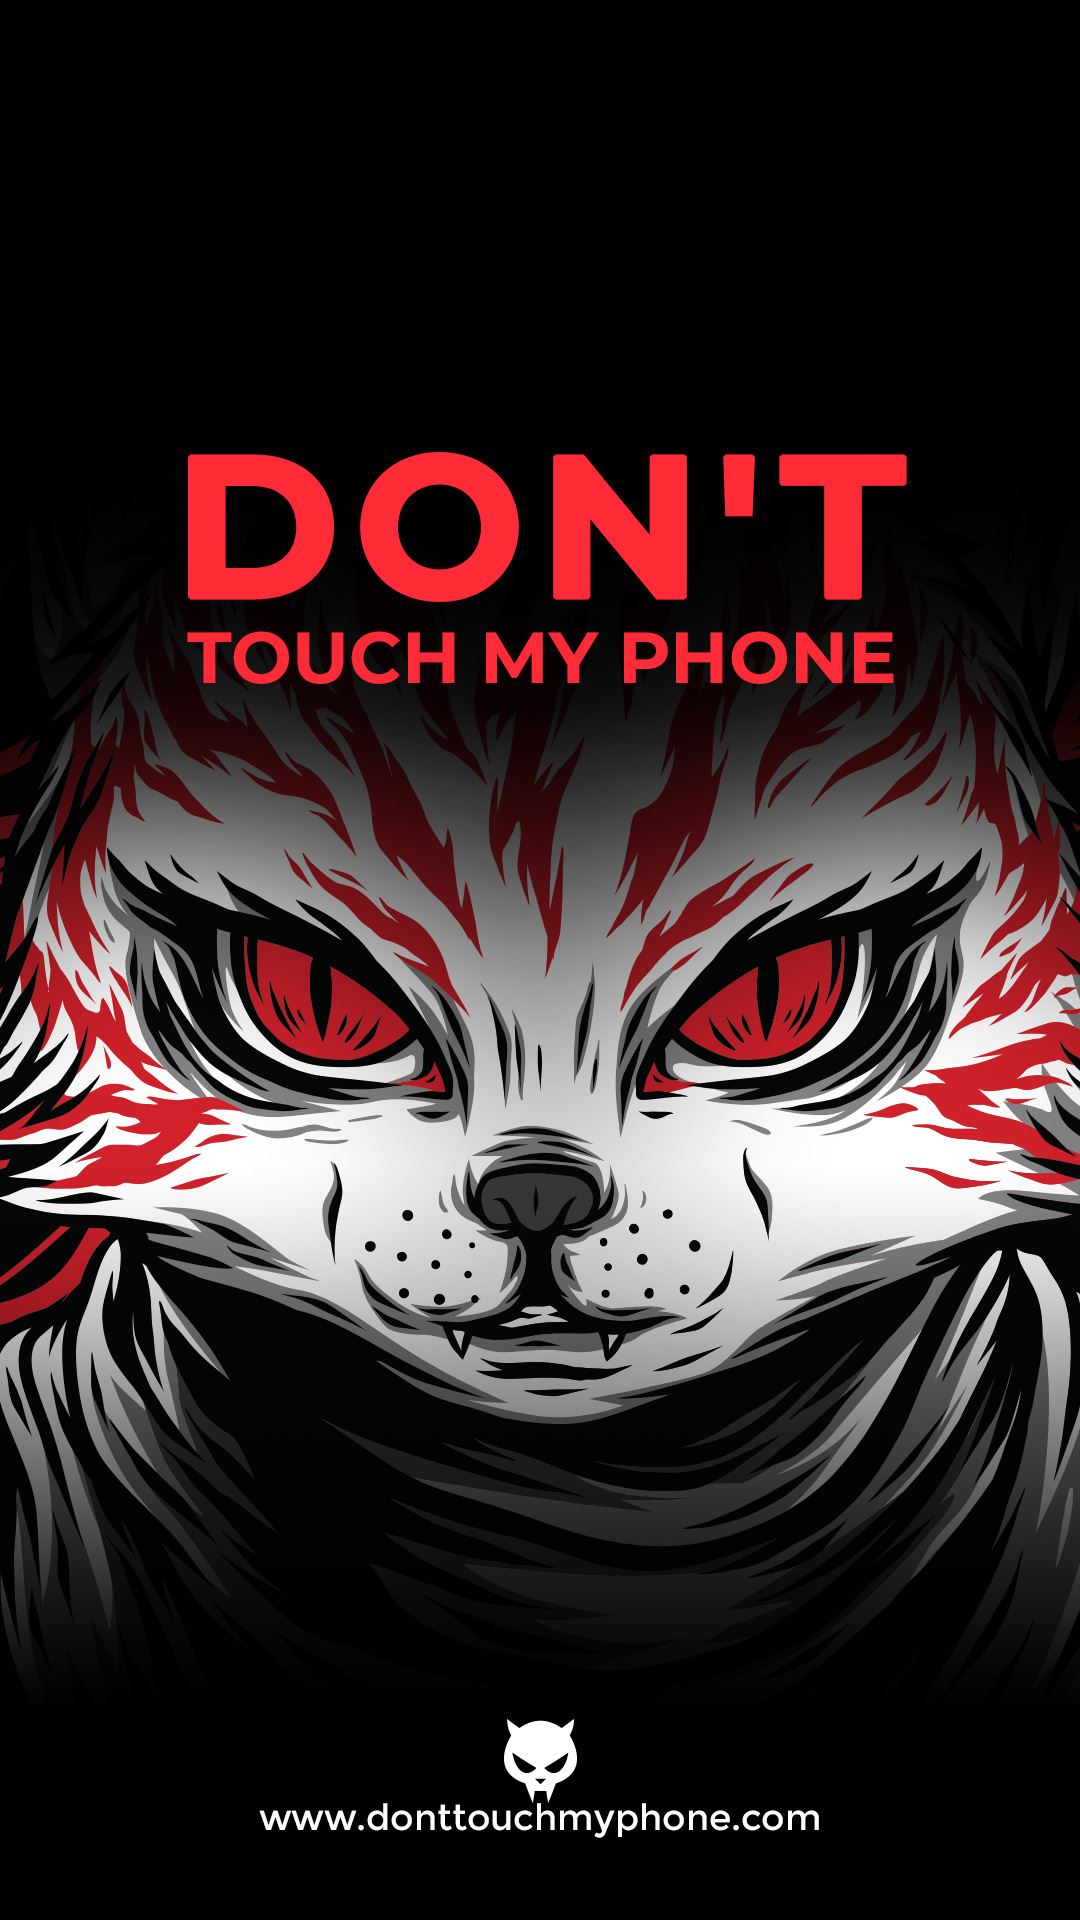 Dont Touch My Phone   Scary Mobile Wallpapers   https 1080x1920